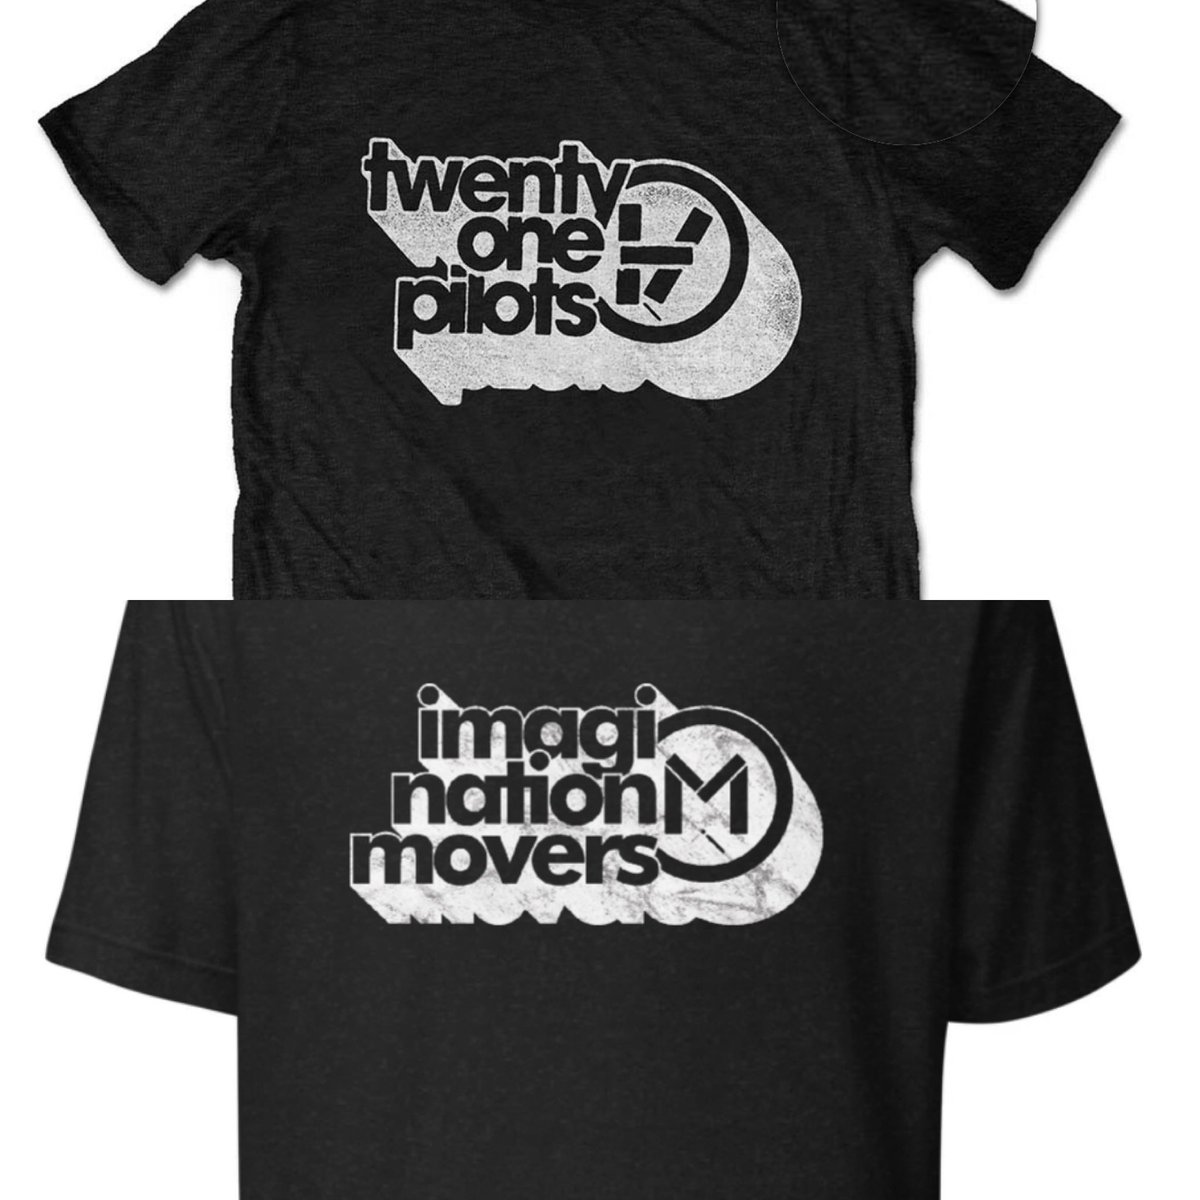 So every quarter, we’re thinking of doing a parody t-shirt based on a band .@twentyonepilots we love. Our first one is an homage to the Twenty One Pilots Vessel tee. There are 10 colors to choose from. Bit.ly/IM21Shirt #twentyonepilots #VesselVintage #imaginationmovers